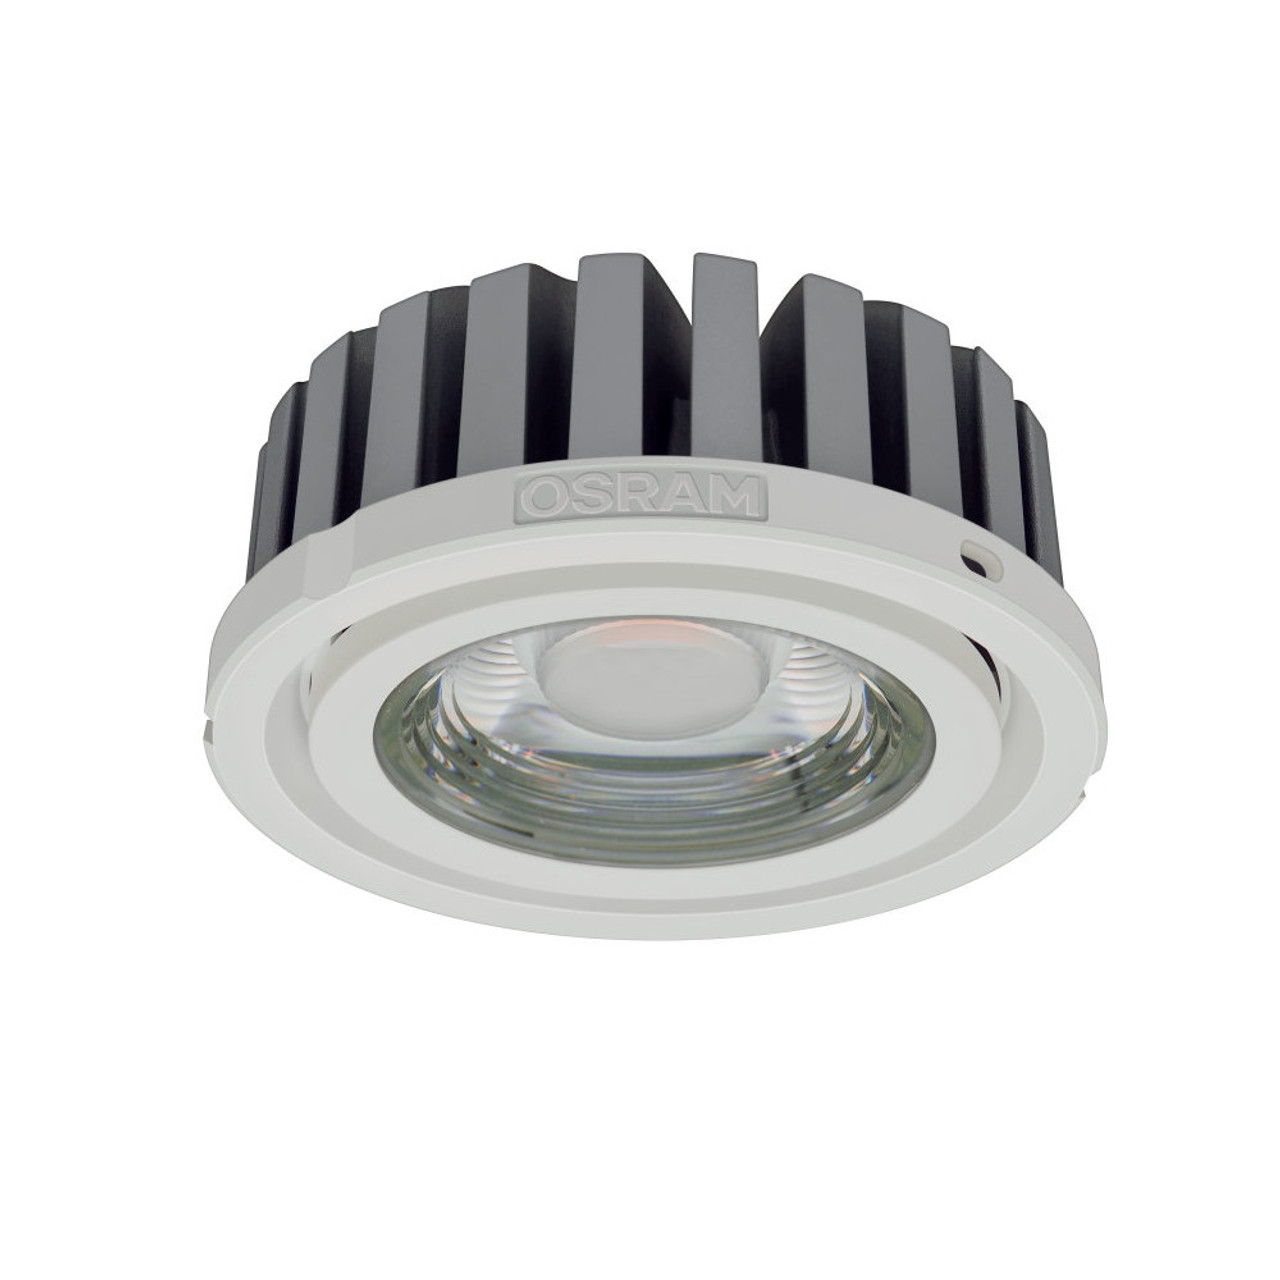 LED 1050mA Constant Current 36.8W Dimmable 935 3500K 3400lm 40 degrees COB